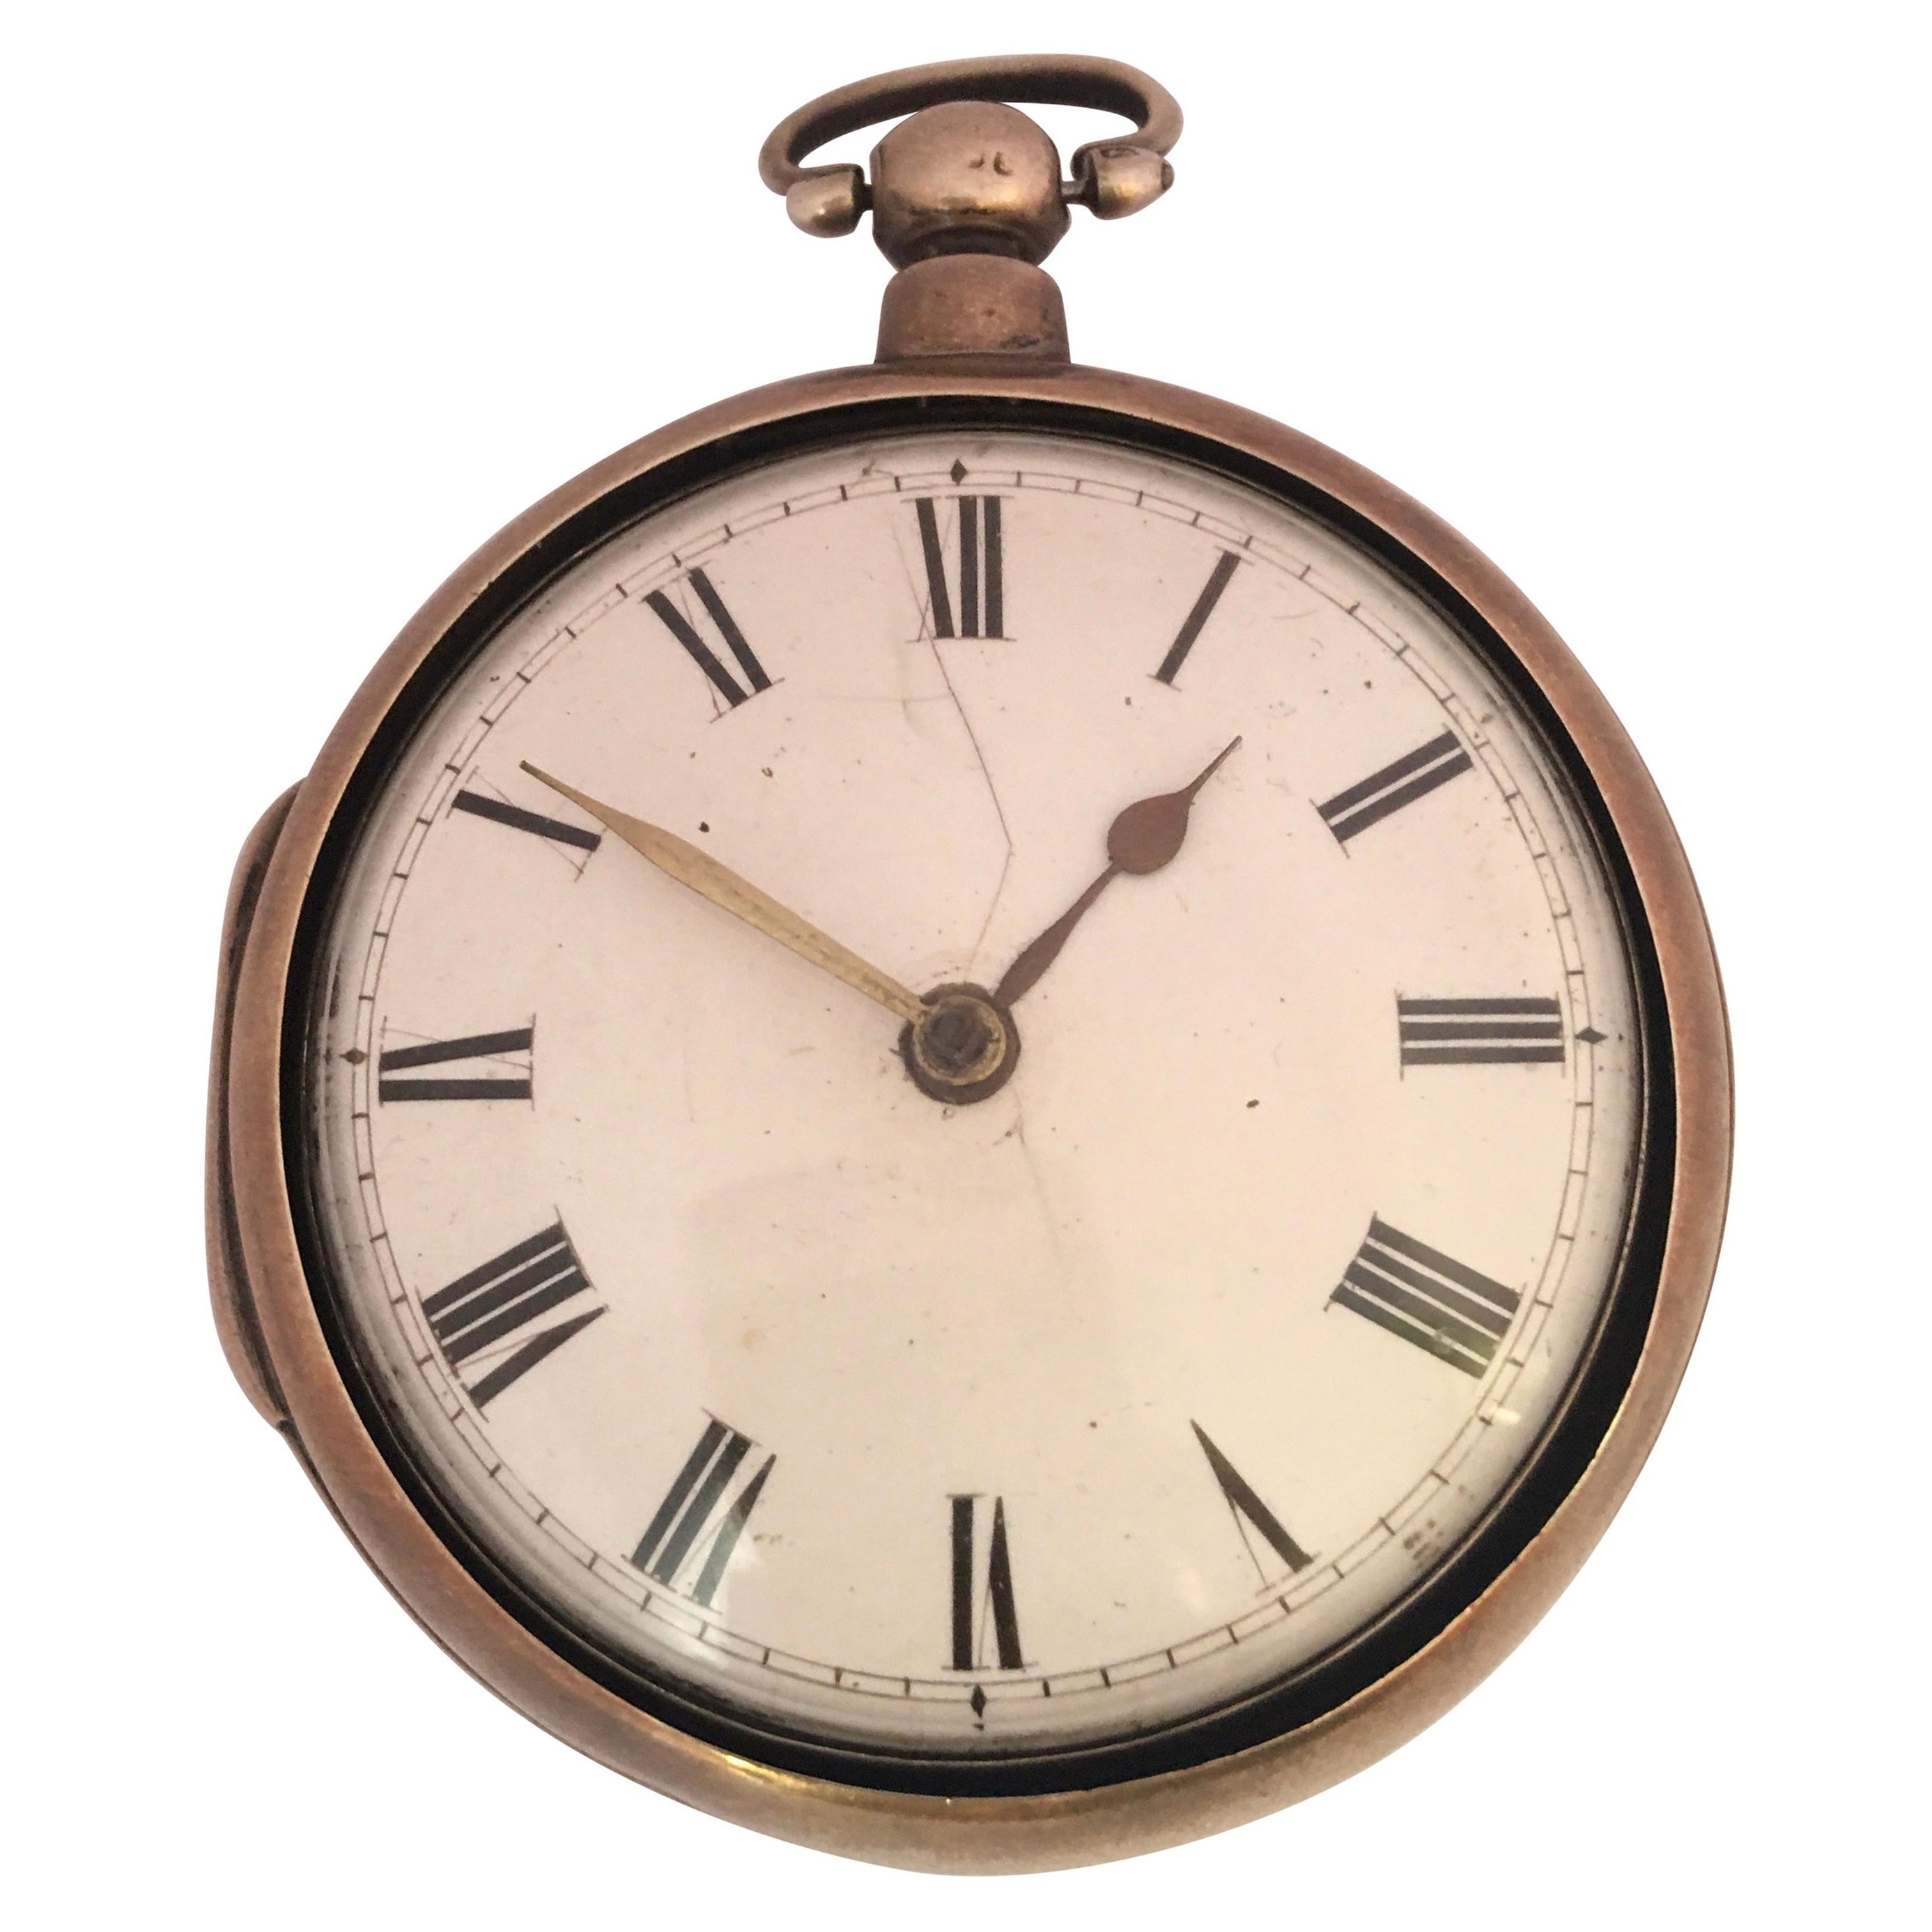 Early English Silver Pair Cased Verge Pocket Watch For Sale